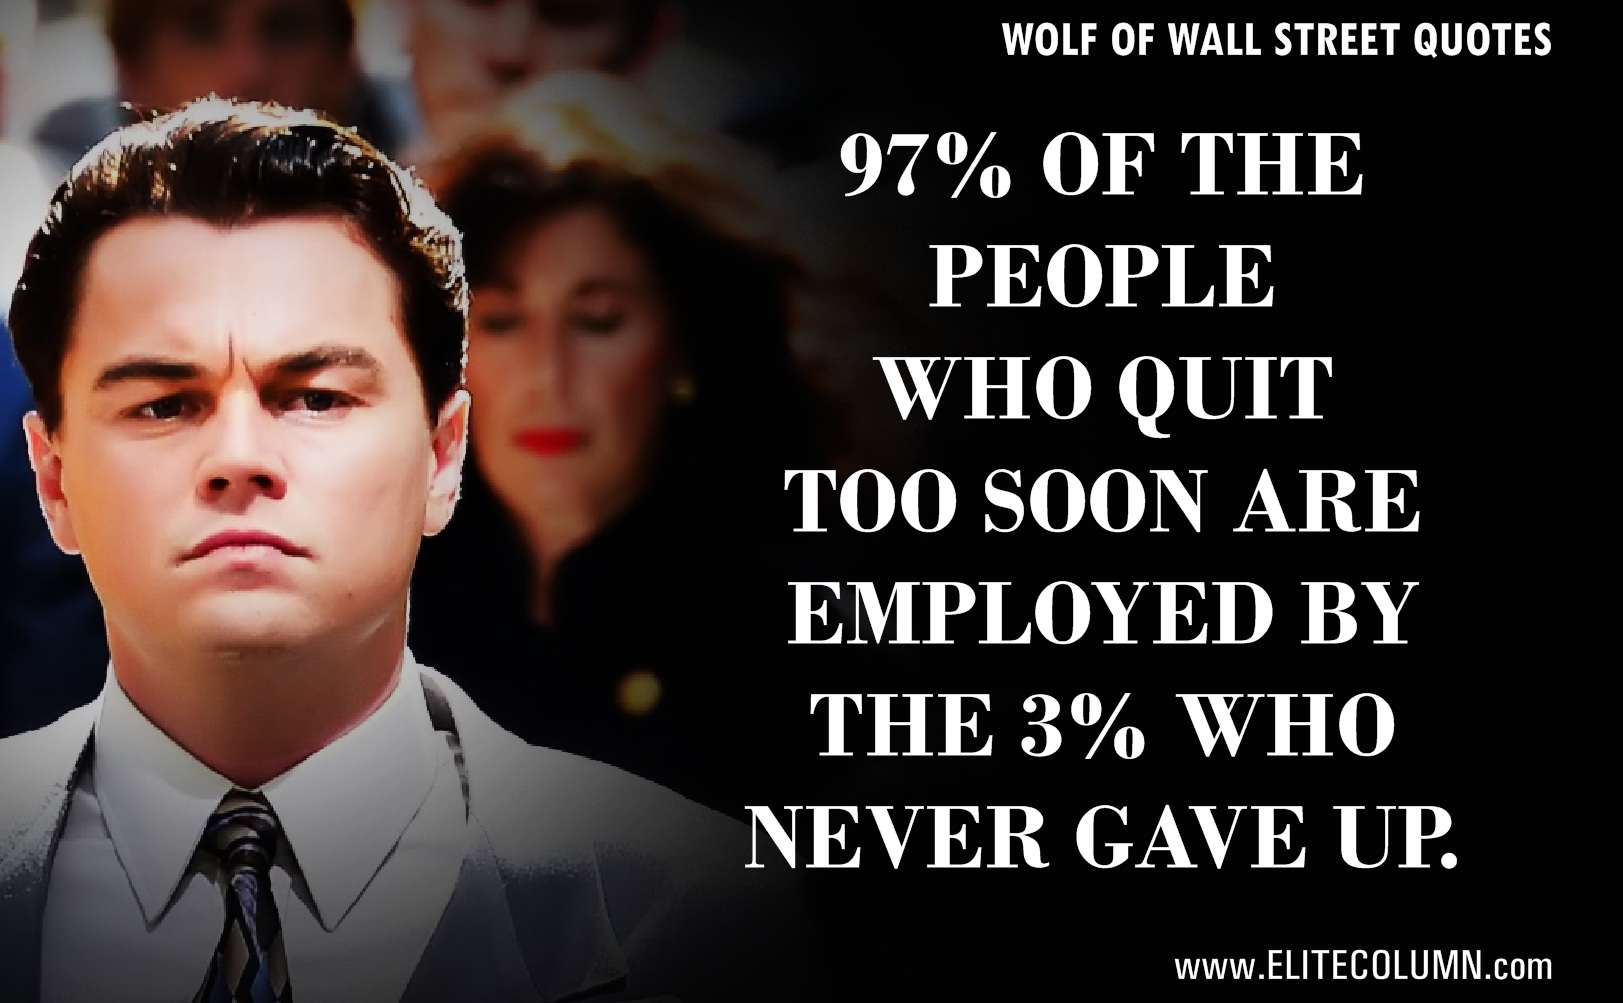 The Wolf of Wall Street Quotes That Will Make You Rich